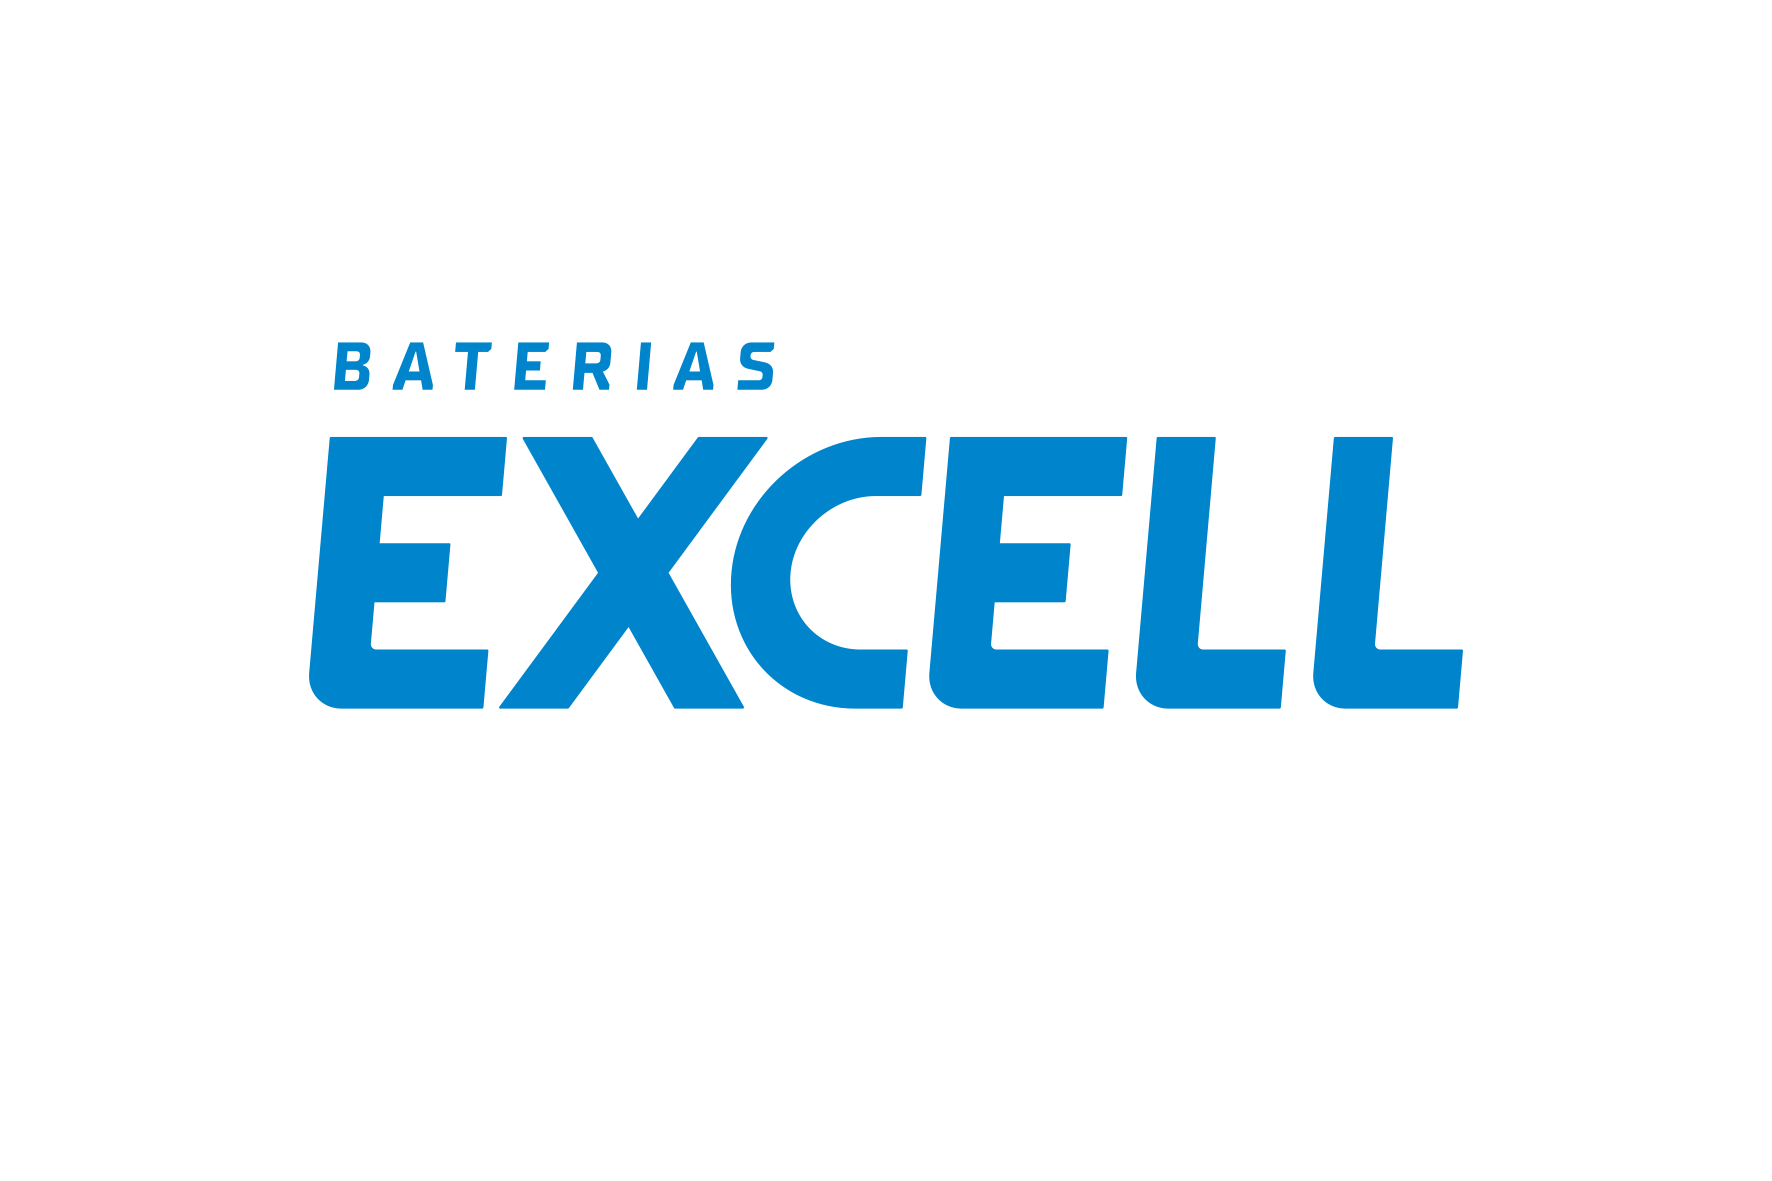 Baterias Excell